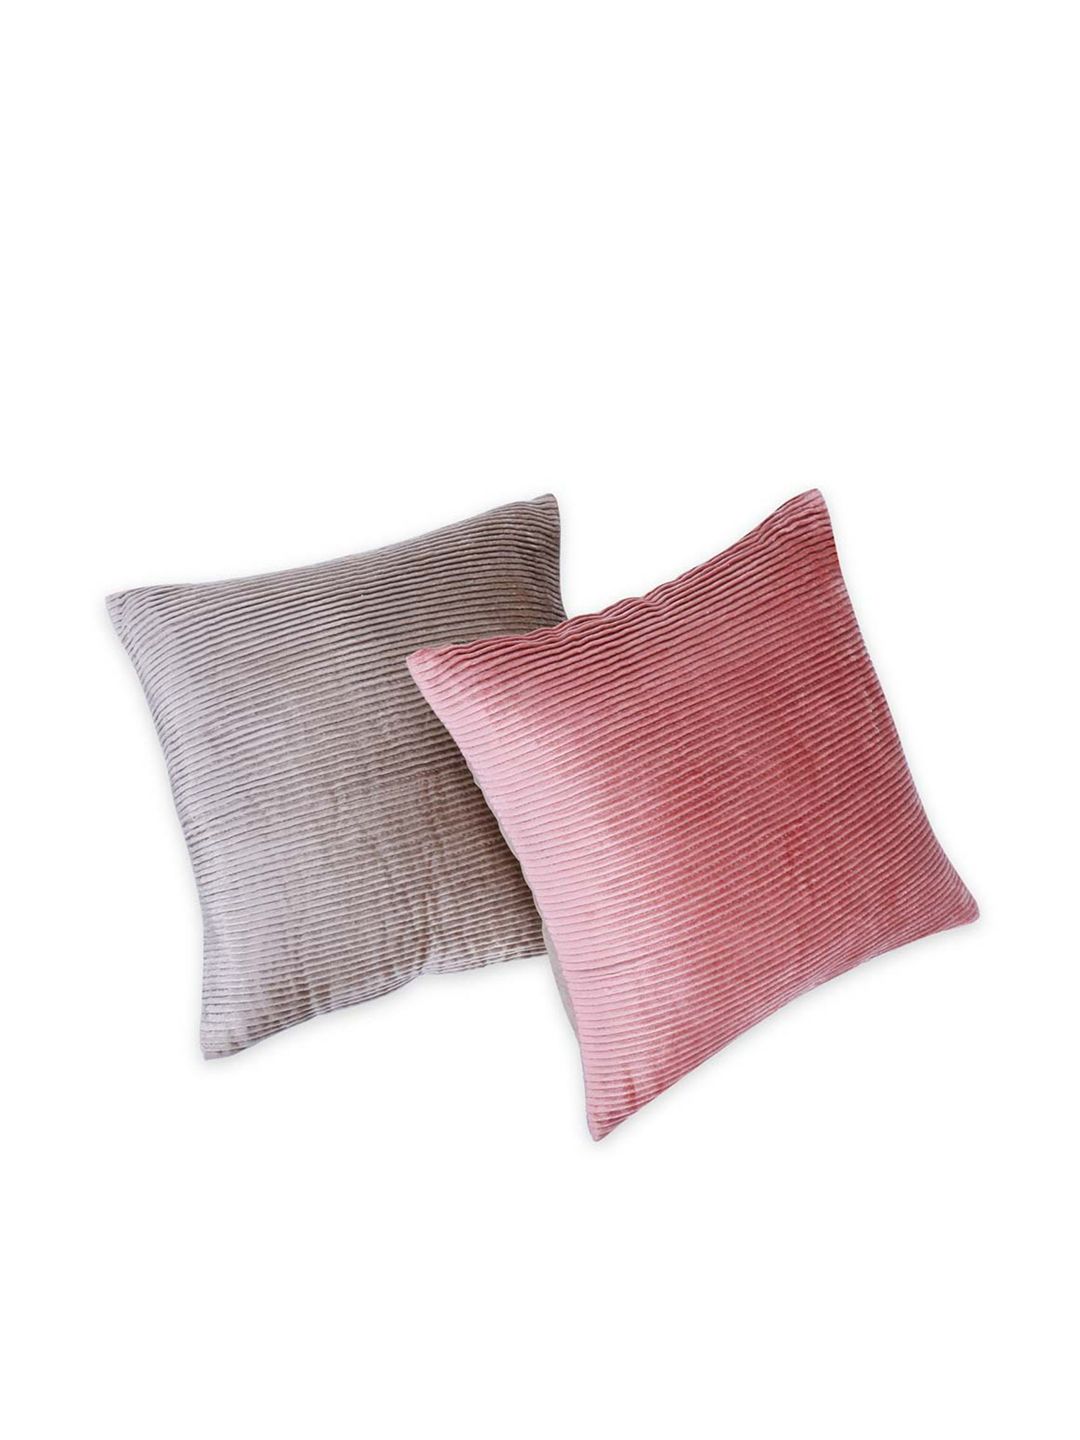 haus & kinder Champagne & Pink Set of 2 Striped Square Cushion Covers Price in India